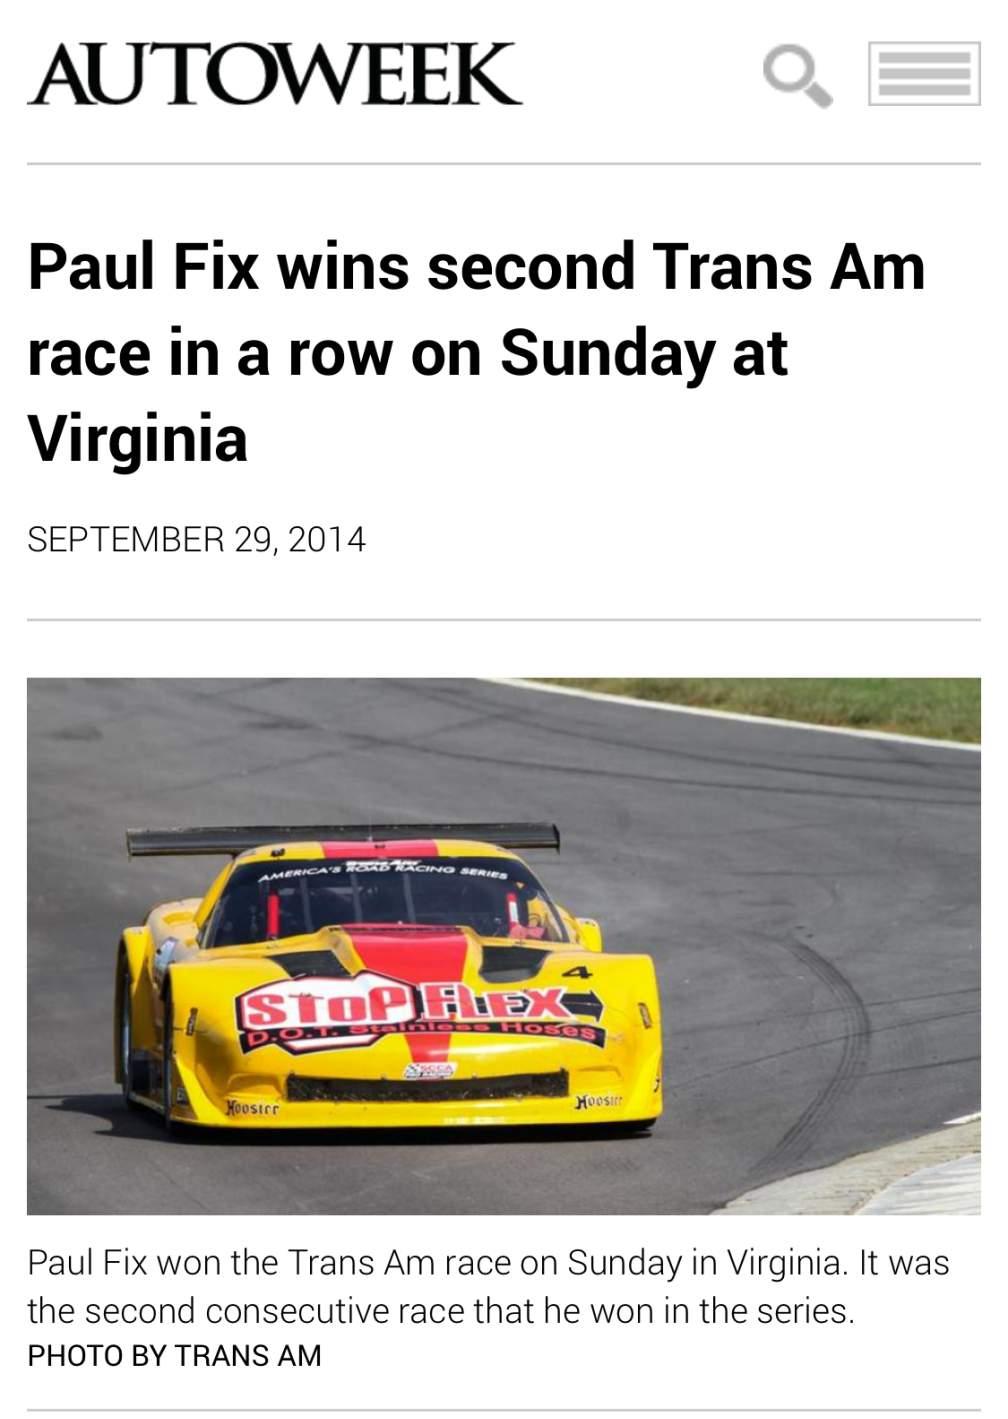 Media and PR Initiatives/Coverage»» A continued initiative in 2015, the Trans Am Series will partner with